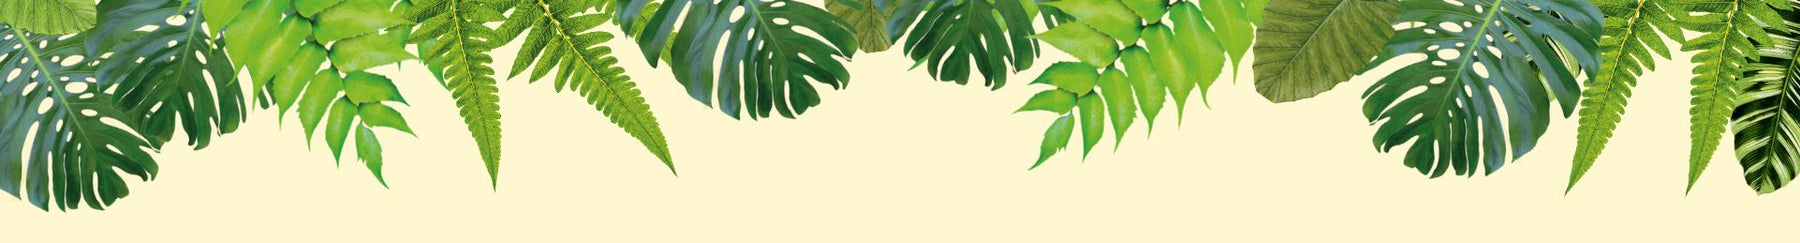 Illustrated foliage hanging down over a yellow background